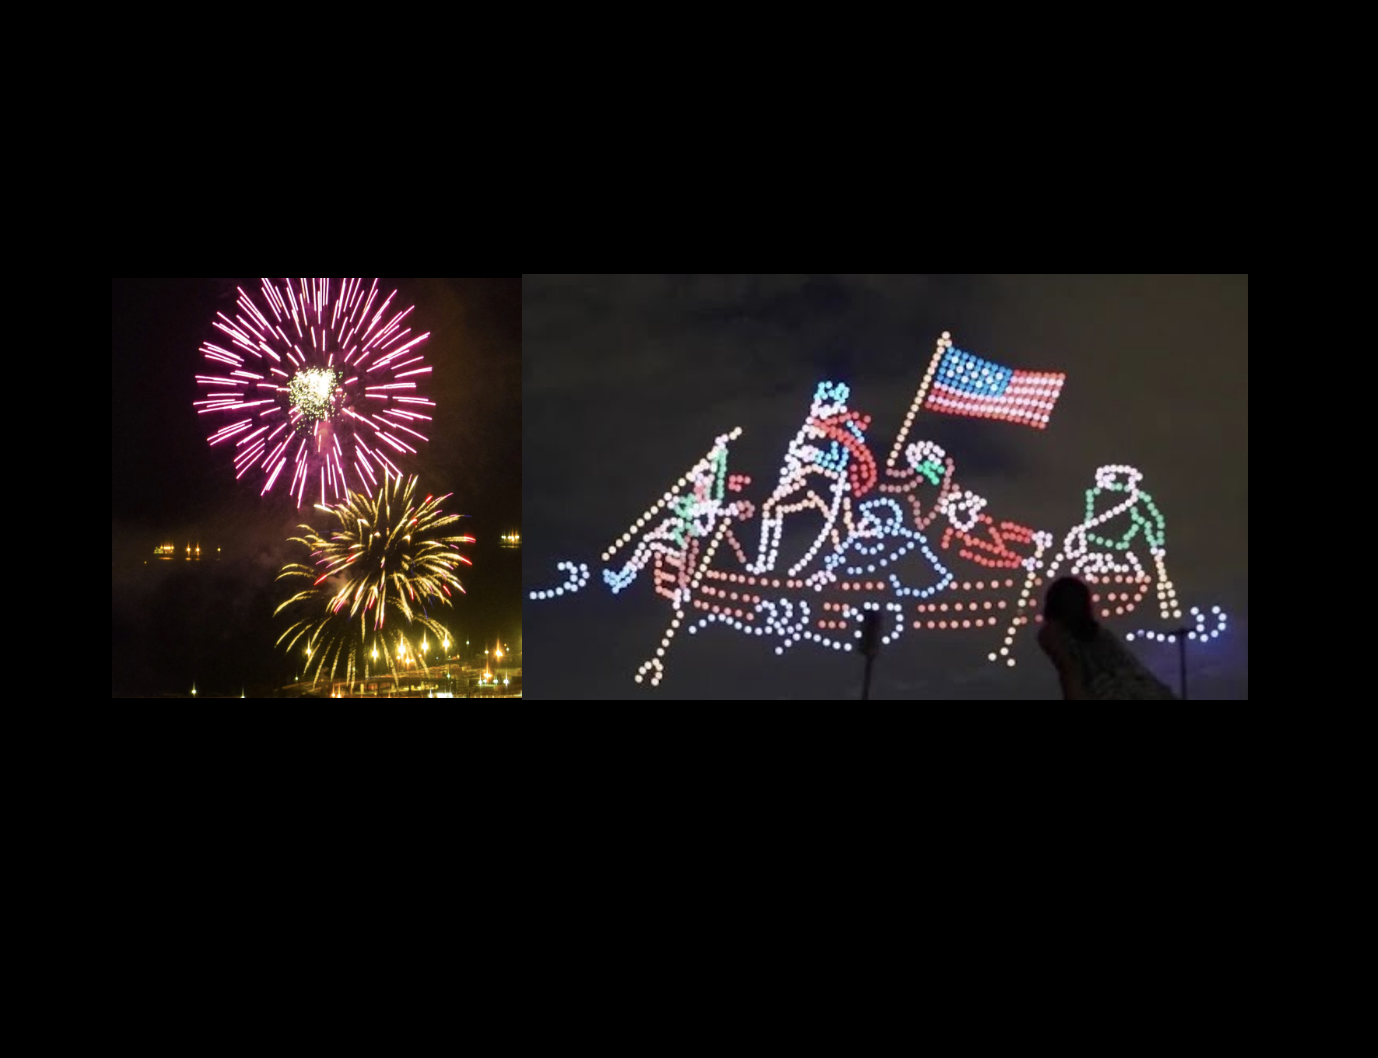 Battle of the 4th: Fireworks vs. Drones